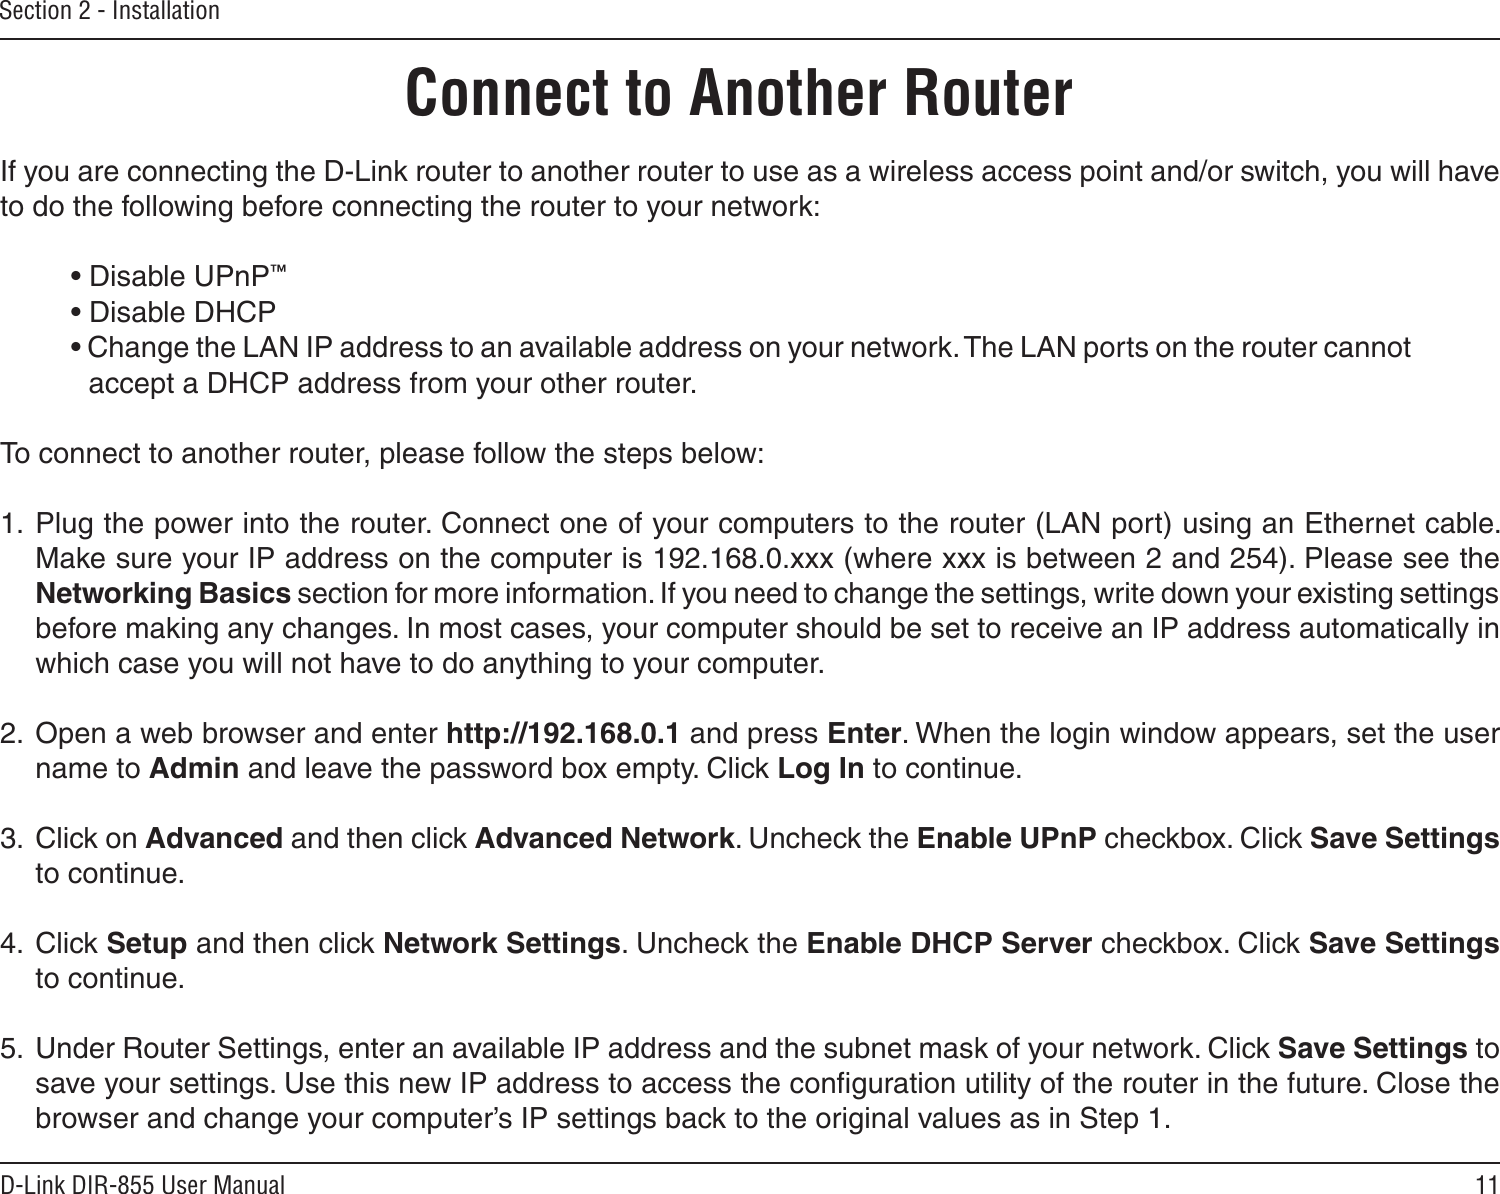 11D-Link DIR-855 User ManualSection 2 - InstallationIf you are connecting the D-Link router to another router to use as a wireless access point and/or switch, you will have to do the following before connecting the router to your network:• Disable UPnP™• Disable DHCP• Change the LAN IP address to an available address on your network. The LAN ports on the router cannot accept a DHCP address from your other router.To connect to another router, please follow the steps below:1.  Plug the power into the router. Connect one of your computers to the router (LAN port) using an Ethernet cable. Make sure your IP address on the computer is 192.168.0.xxx (where xxx is between 2 and 254). Please see the Networking Basics section for more information. If you need to change the settings, write down your existing settings before making any changes. In most cases, your computer should be set to receive an IP address automatically in which case you will not have to do anything to your computer.2.  Open a web browser and enter http://192.168.0.1 and press Enter. When the login window appears, set the user name to Admin and leave the password box empty. Click Log In to continue.3.  Click on Advanced and then click Advanced Network. Uncheck the Enable UPnP checkbox. Click Save Settings to continue. 4.  Click Setup and then click Network Settings. Uncheck the Enable DHCP Server checkbox. Click Save Settings to continue.5.  Under Router Settings, enter an available IP address and the subnet mask of your network. Click Save Settings to save your settings. Use this new IP address to access the conﬁguration utility of the router in the future. Close the browser and change your computer’s IP settings back to the original values as in Step 1.Connect to Another Router